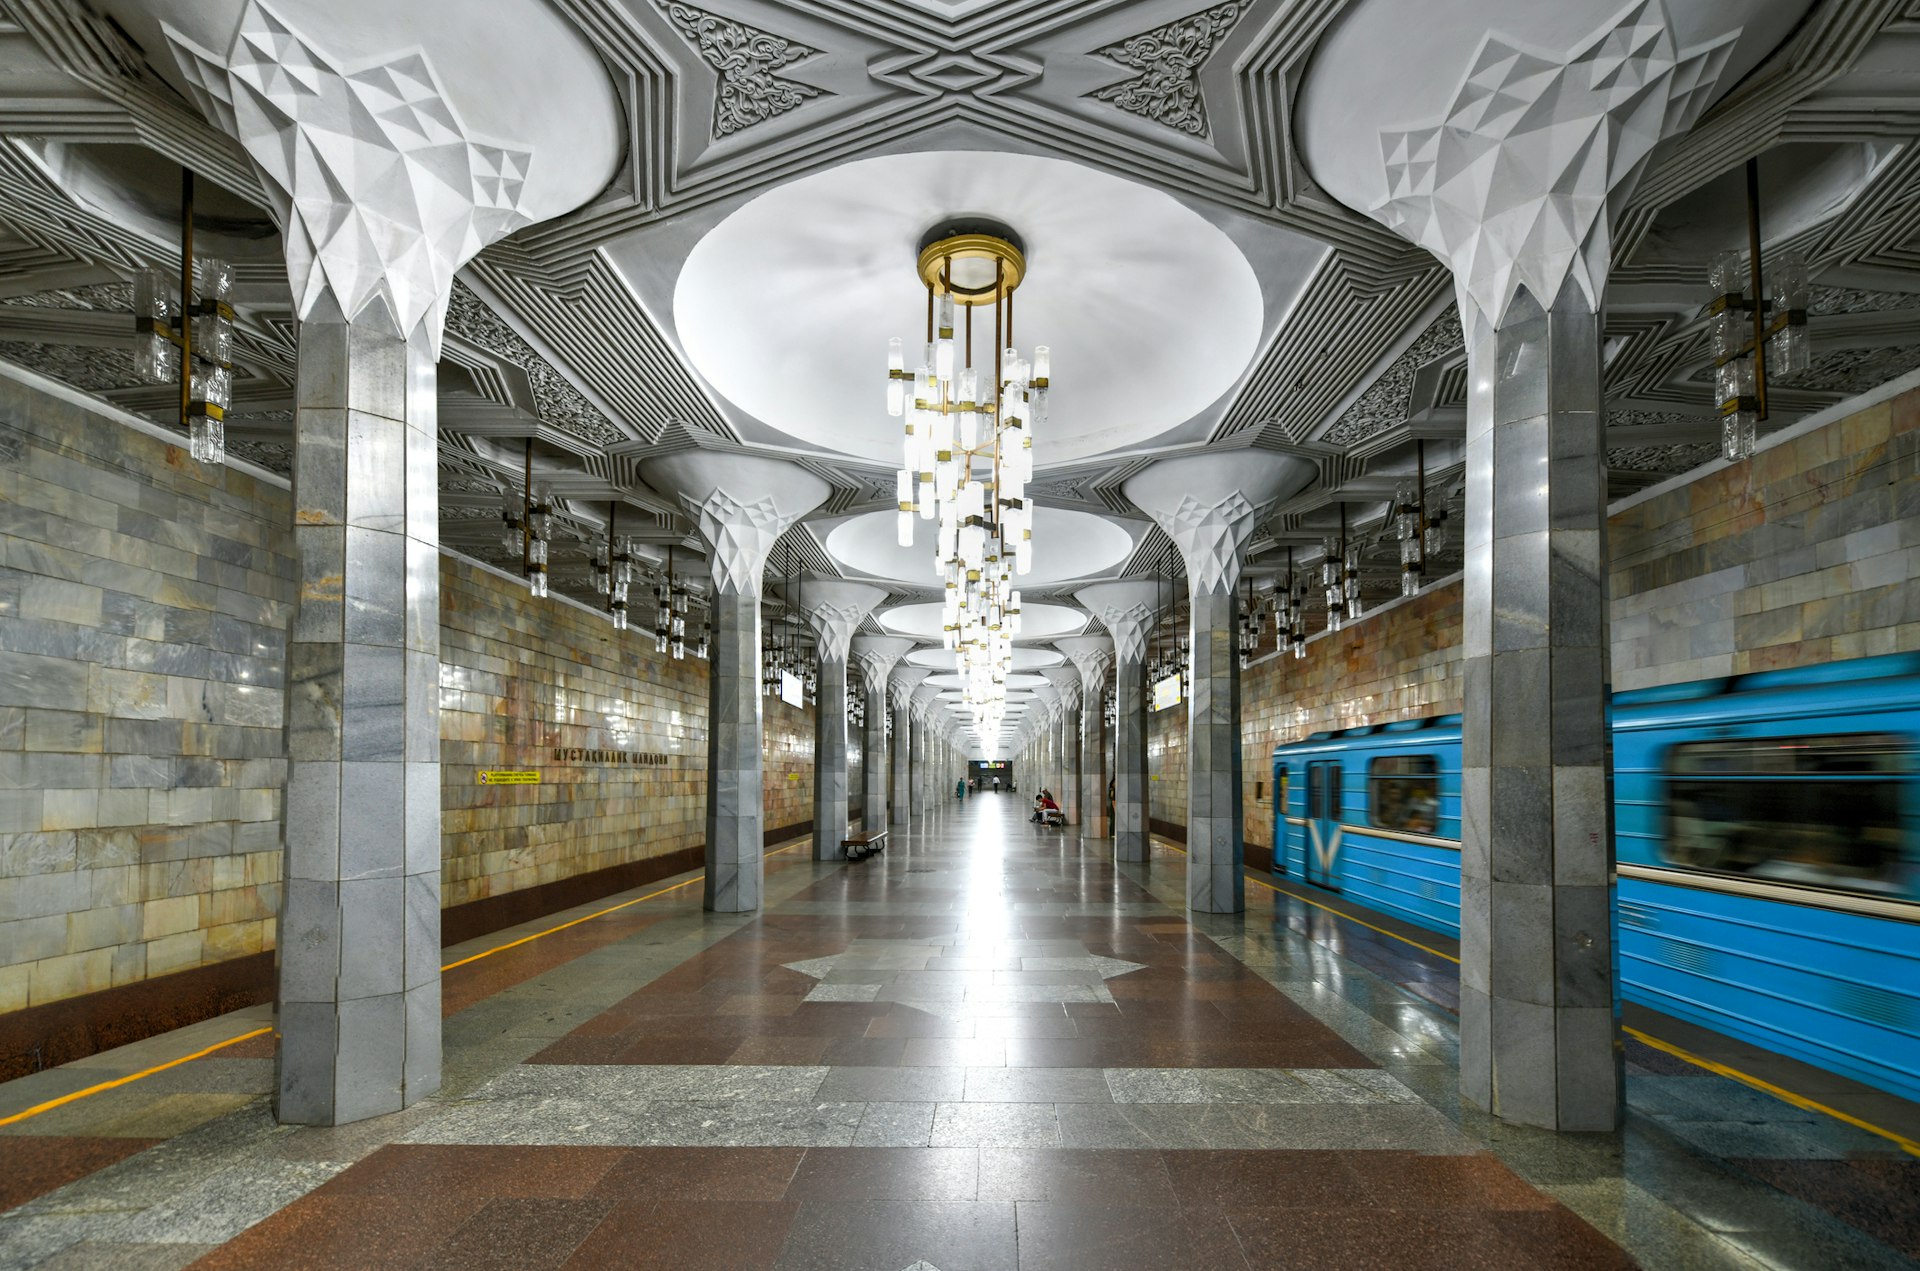 A central platform in an underground station with large decorative light fixtures hanging down